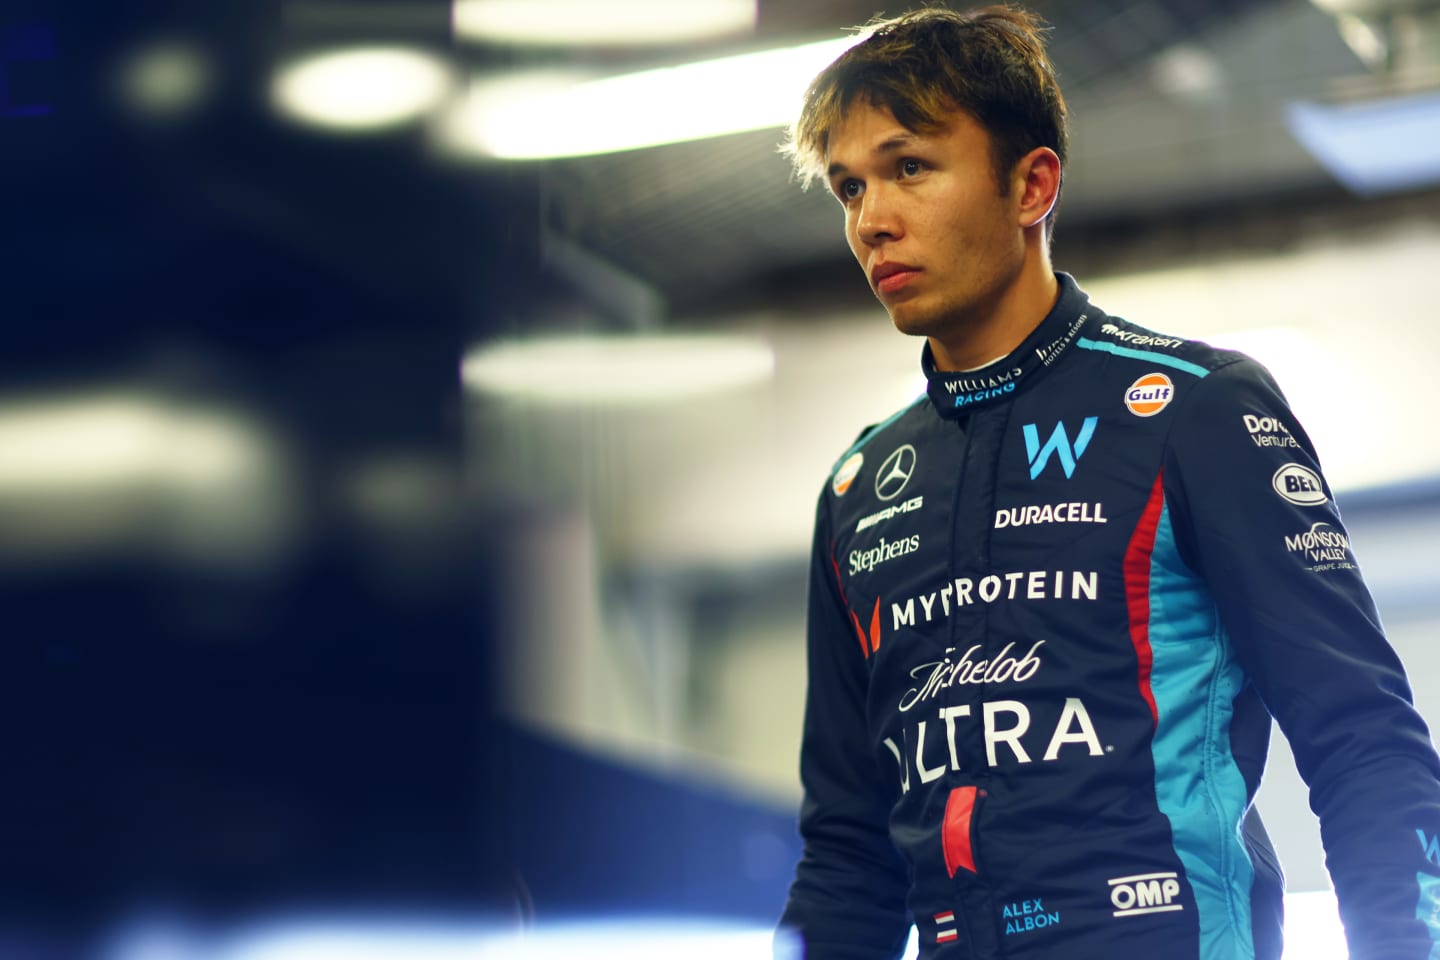 MEXICO CITY, MEXICO - OCTOBER 28: Fourteenth placed qualifier Alexander Albon of Thailand and Williams looks on in the FIA Garage during qualifying ahead of the F1 Grand Prix of Mexico at Autodromo Hermanos Rodriguez on October 28, 2023 in Mexico City, Mexico. (Photo by Dan Istitene - Formula 1/Formula 1 via Getty Images)